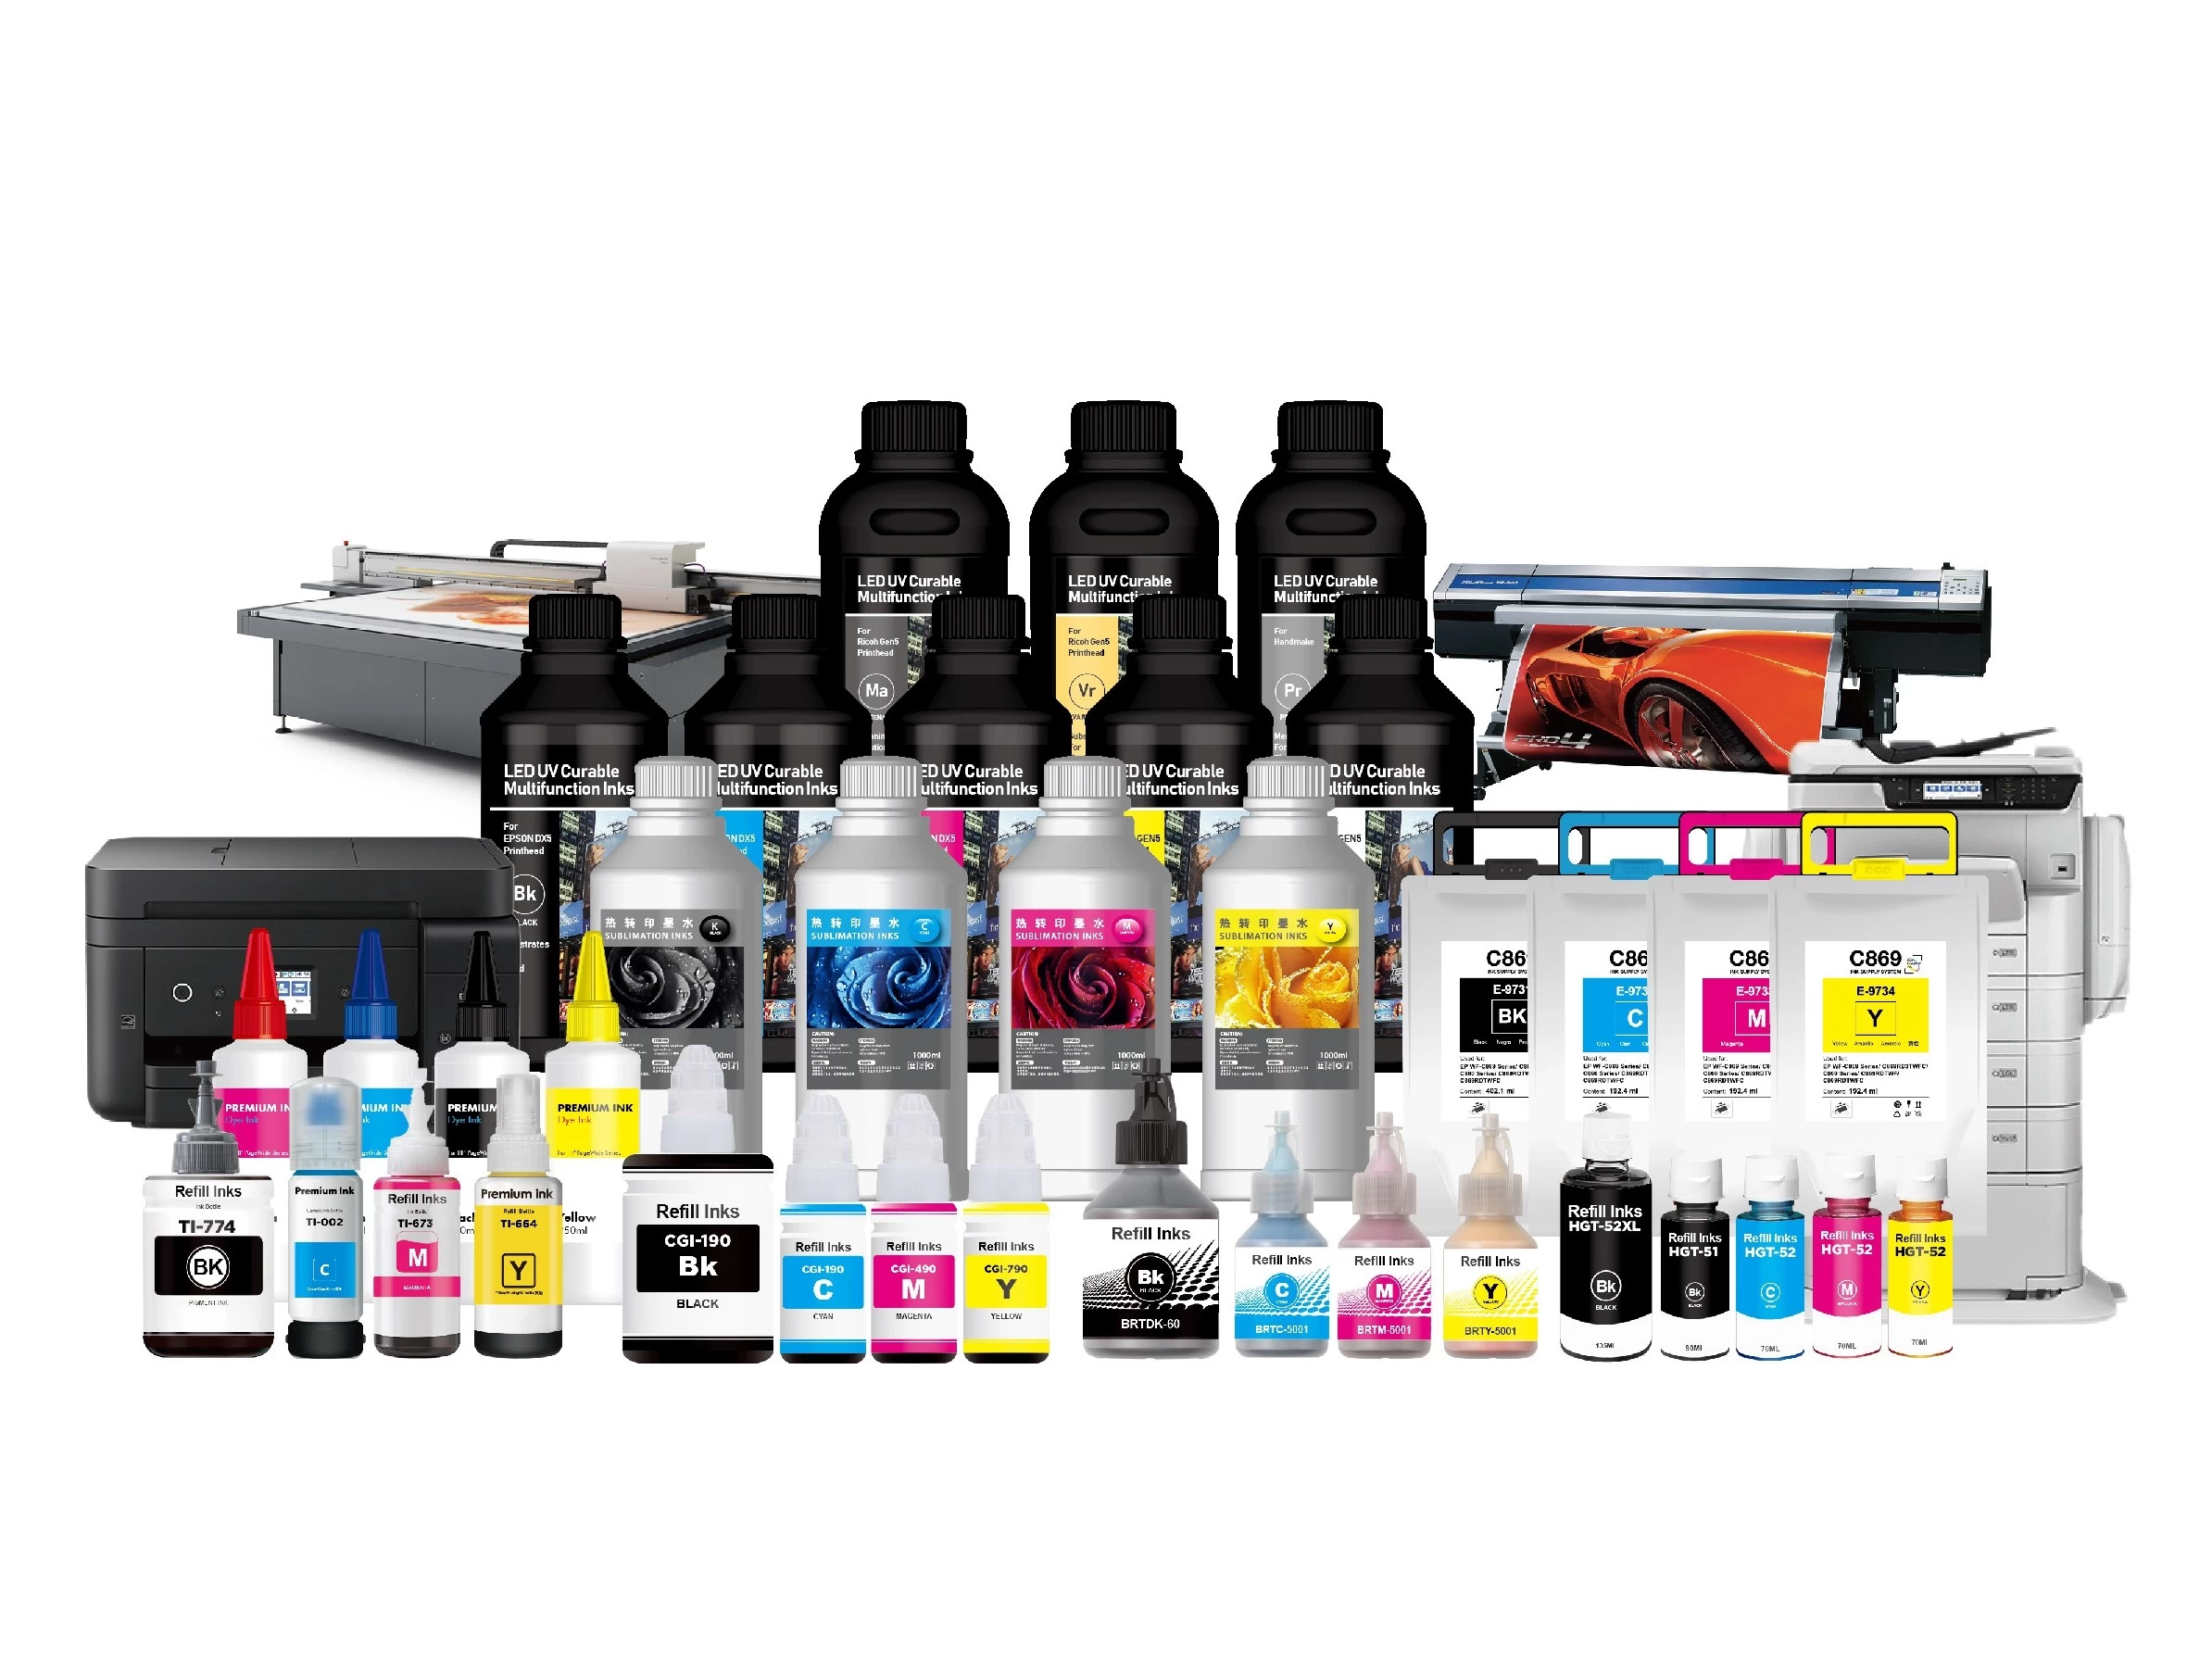 Sublimation Ink Refill for Epson EcoTank Series Printers